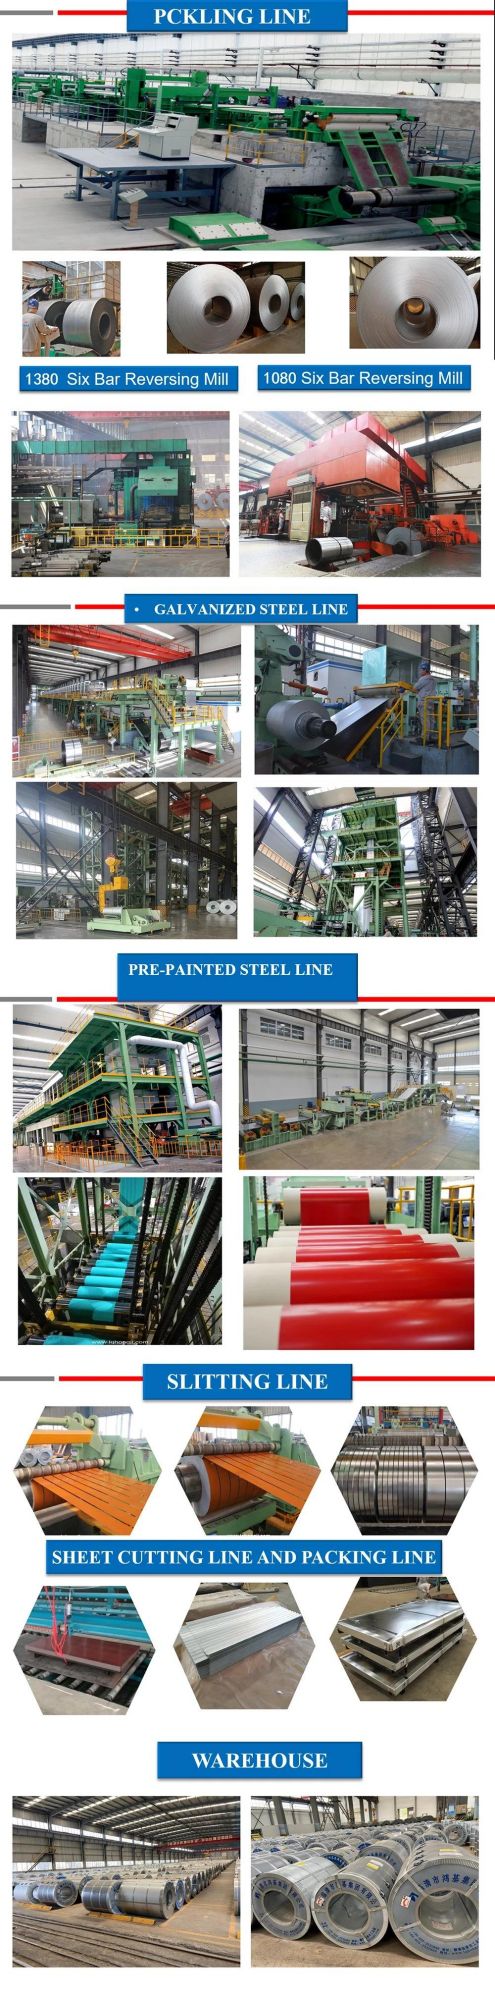 Aluzinc / Galvalume / Coils and Sheets (Aluzink) Steel in Coils Liaocheng Shandong